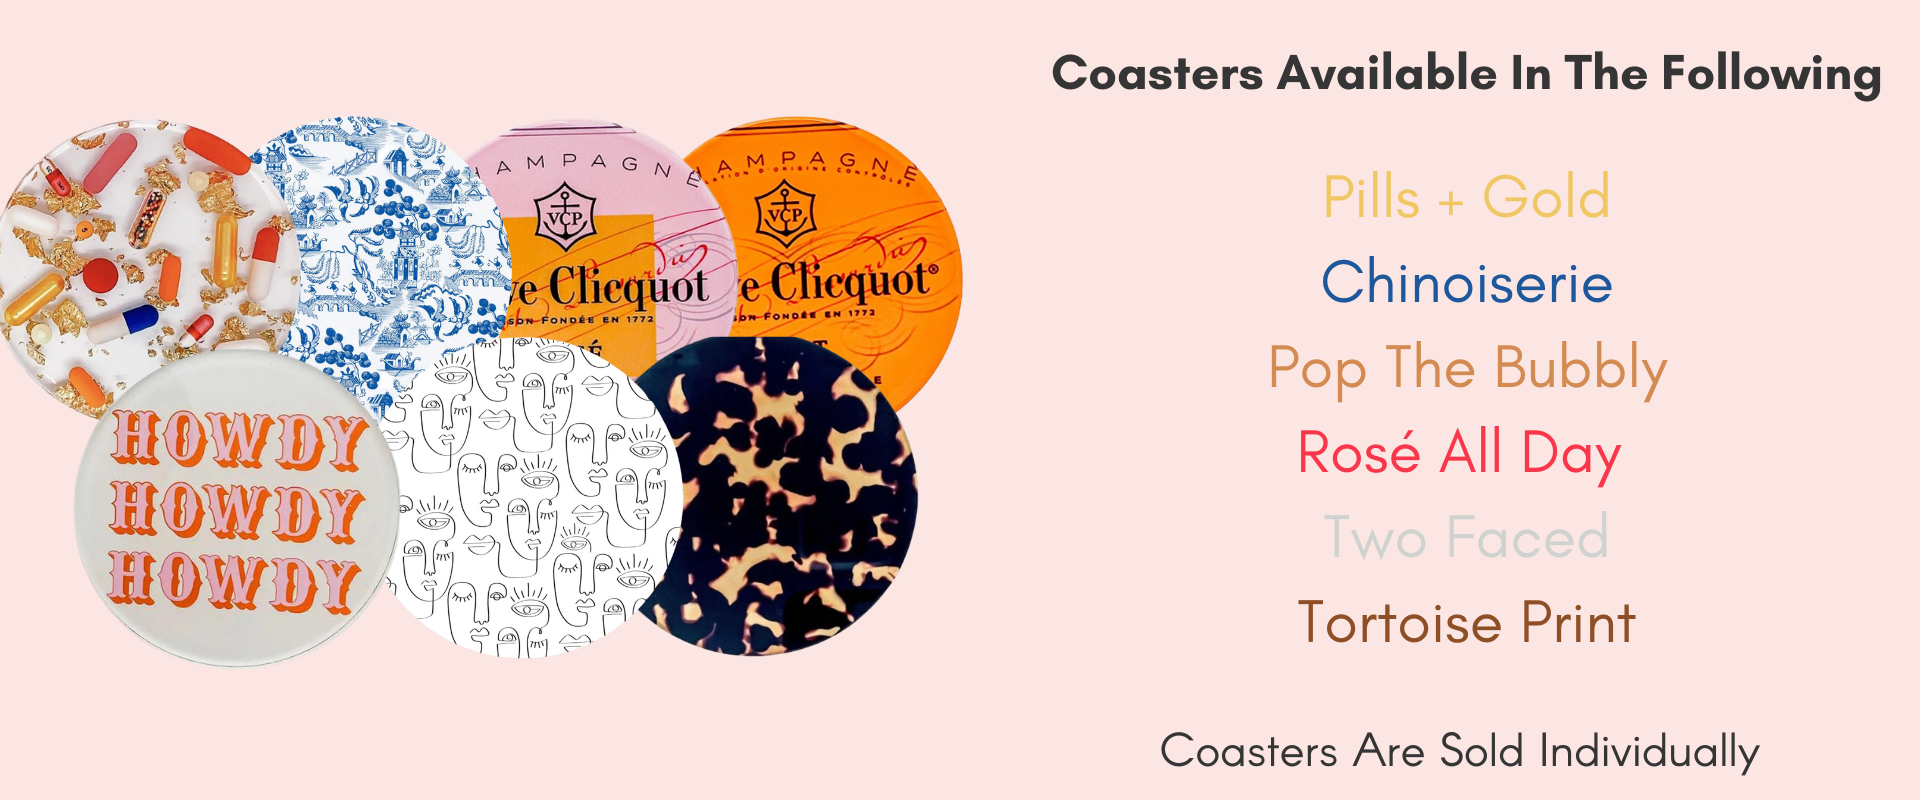 Coasters in pills + gold, chinoiserie, pop the bubbly, rose all day, two faced print, tortoise print